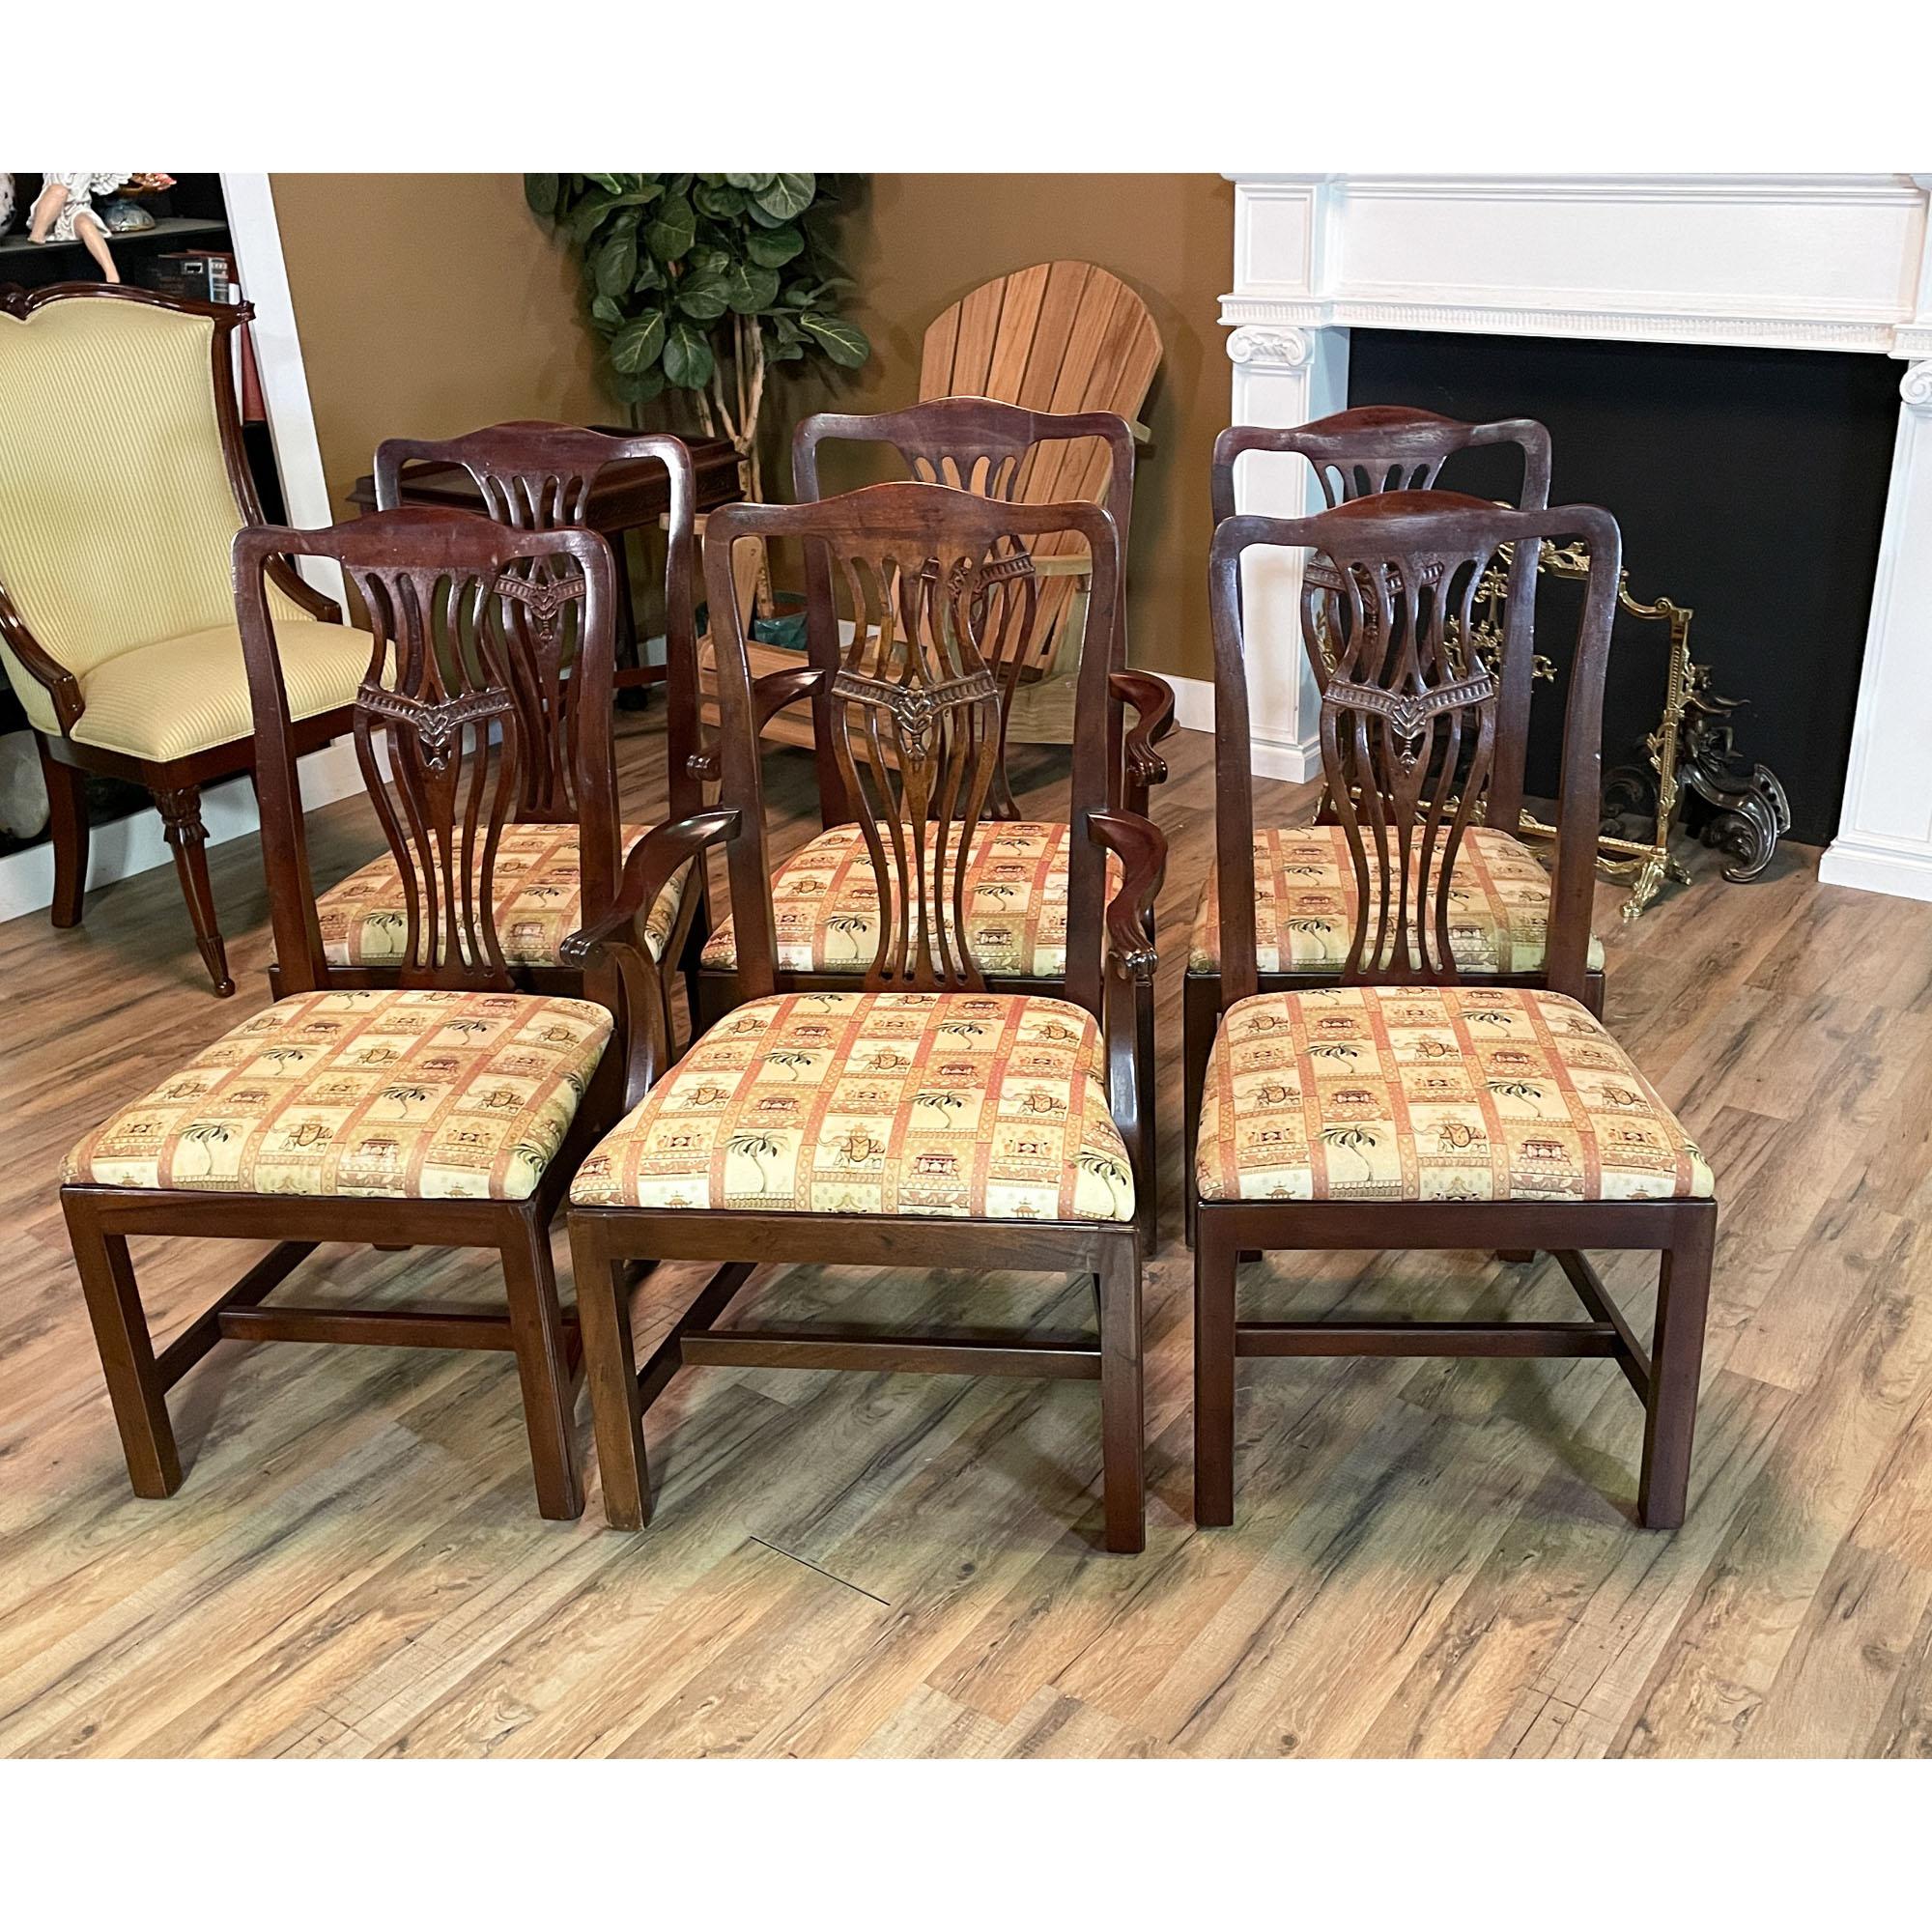 A Henredon Set of 6 Vintage Chairs in excellent condition.

Both elegant and incredibly detailed this beautiful Henredon Set of 6 Vintage Chairs have everything one could ask for in chairs created for the dining room.

The Henredon Set of 6